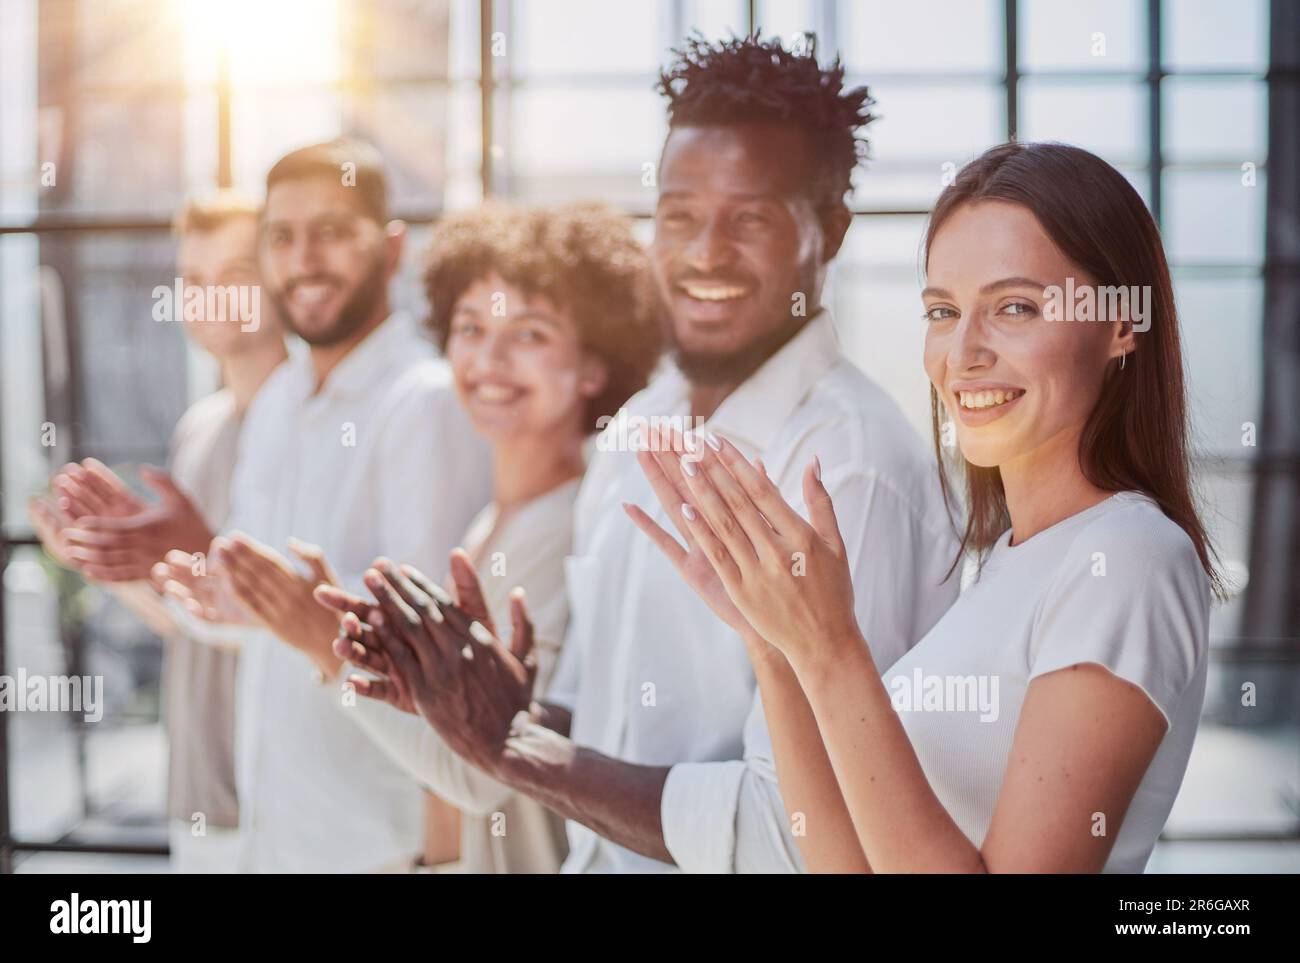 Professional Business Teamwork . People Business Congratulation, Management Corporate Company Stock Photo